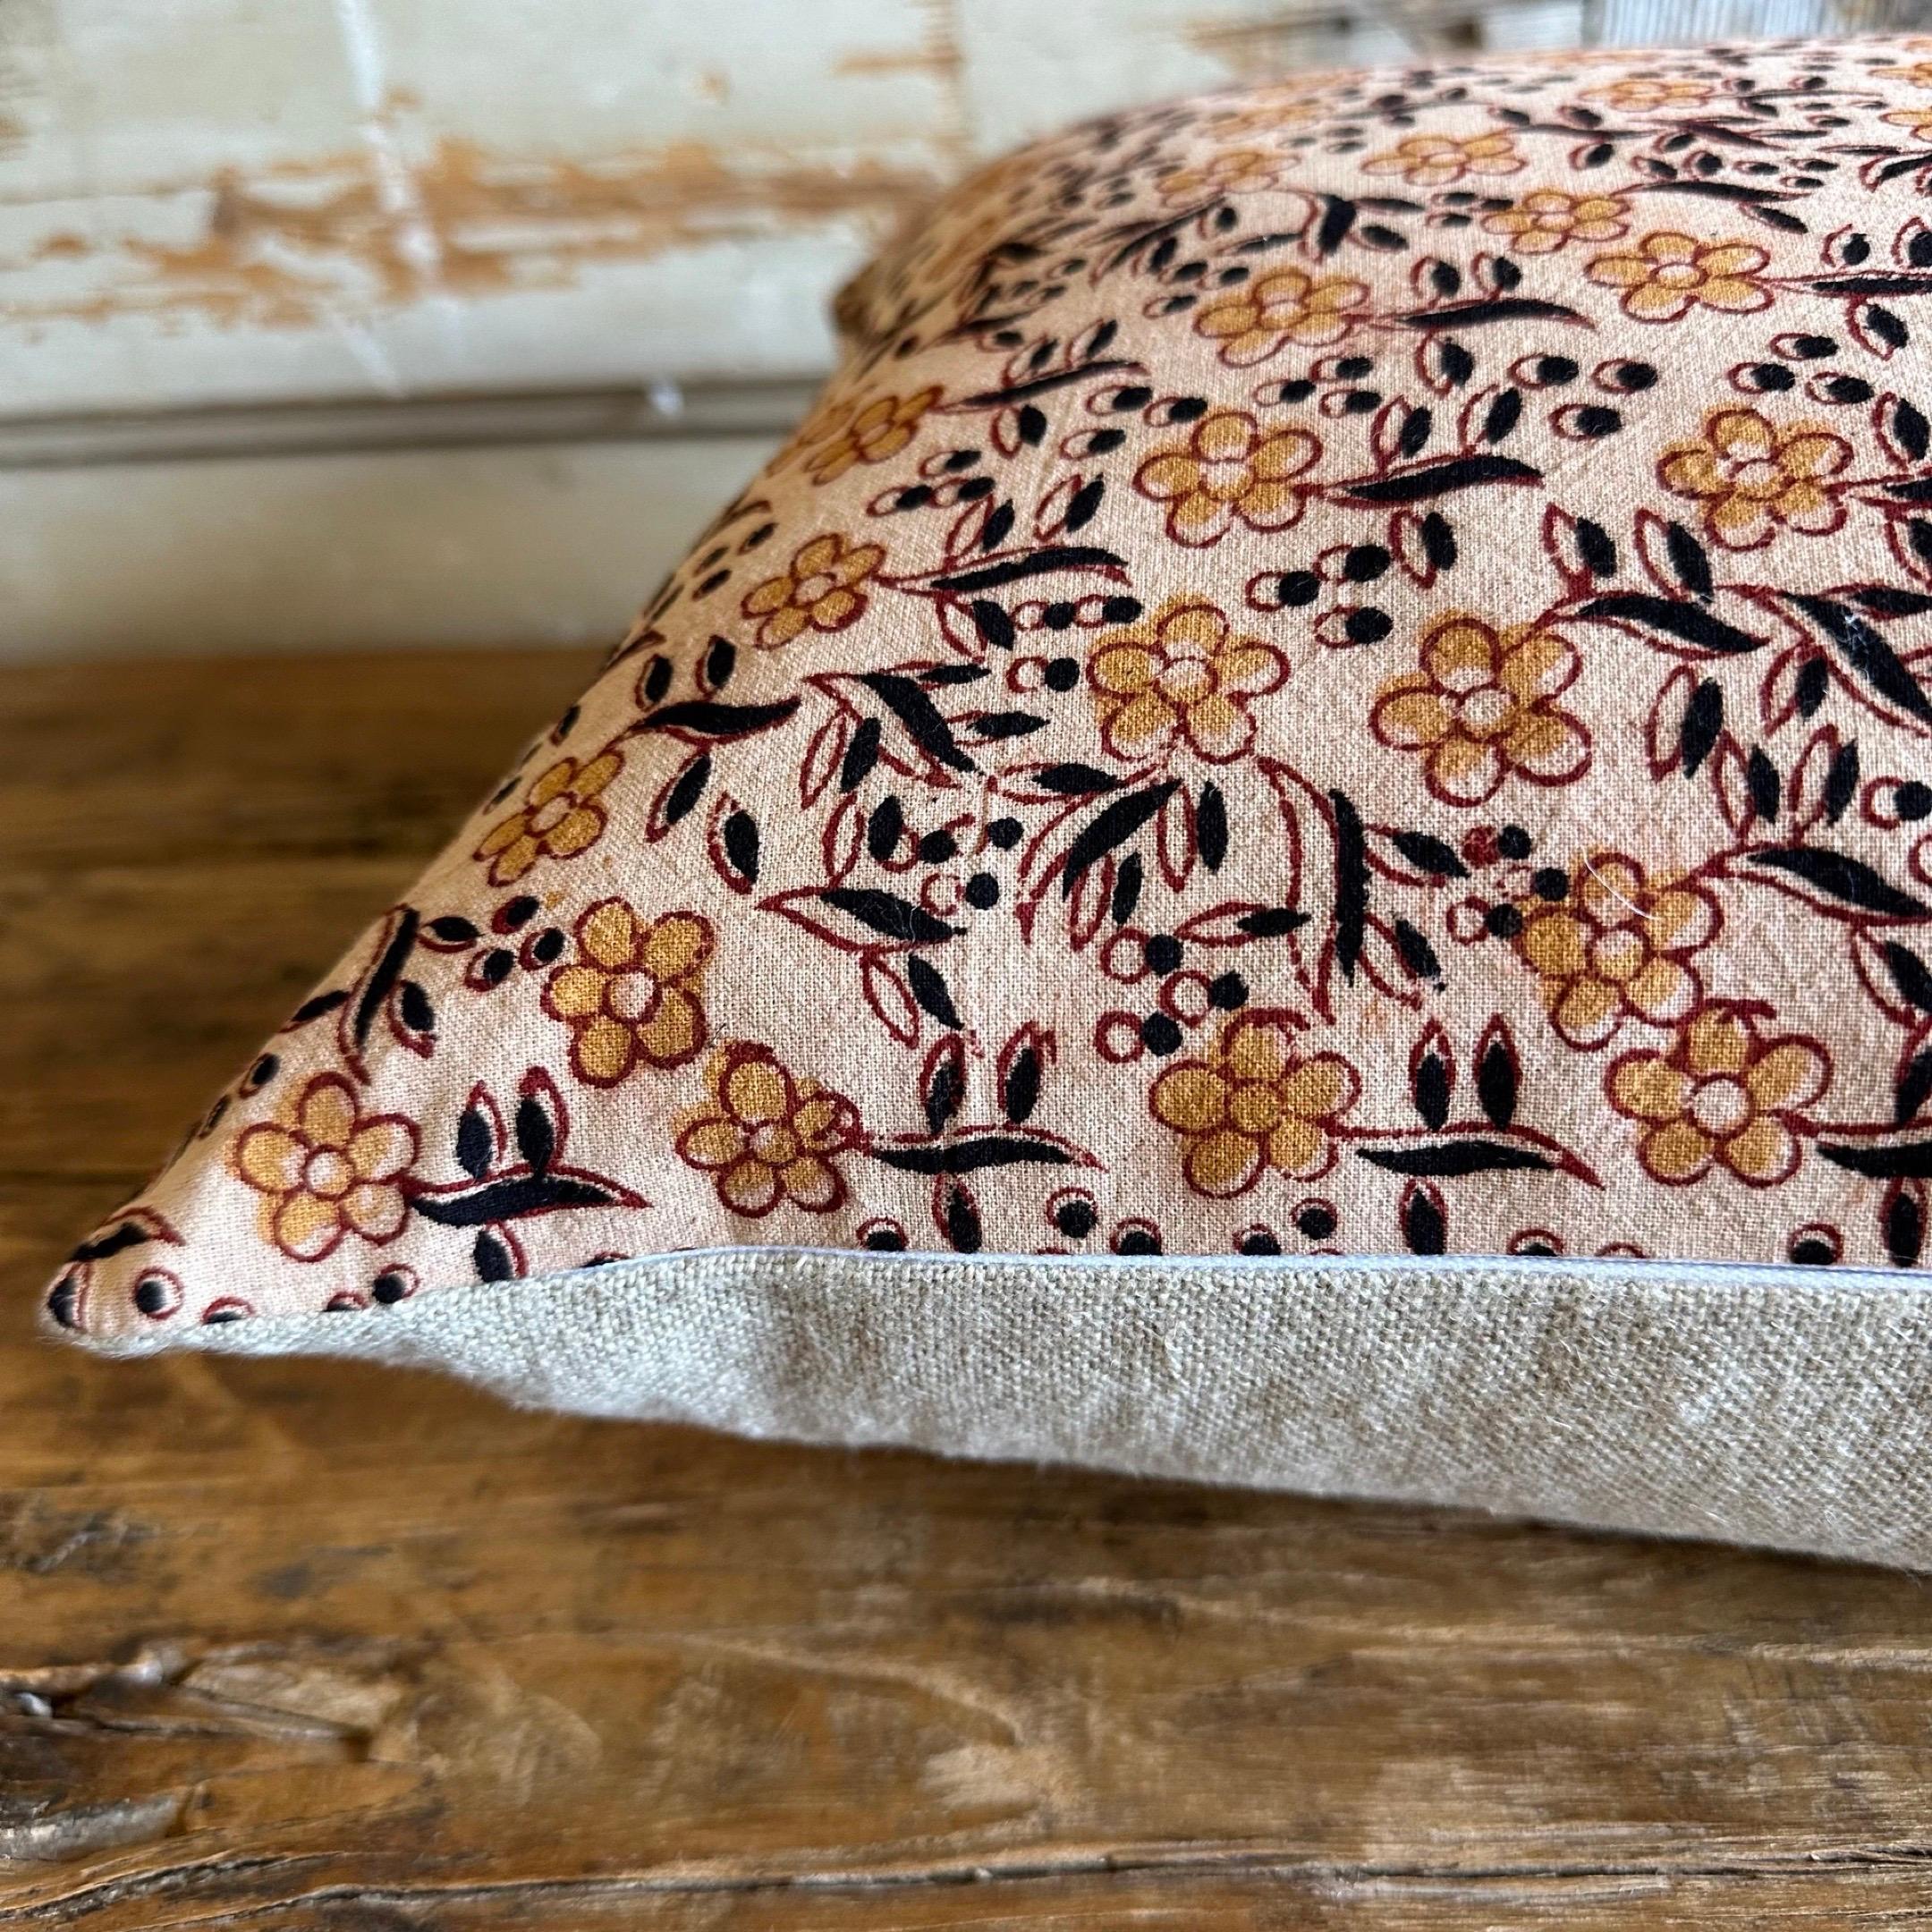 Beautifully hand block-printed pillow on hand loomed cotton fabric. Featuring a floral pattern in the mustard and coco. Fabric care: cold hand wash with mild soap, line dry. Do not tumble dry, soak or bleach. Iron at medium setting if